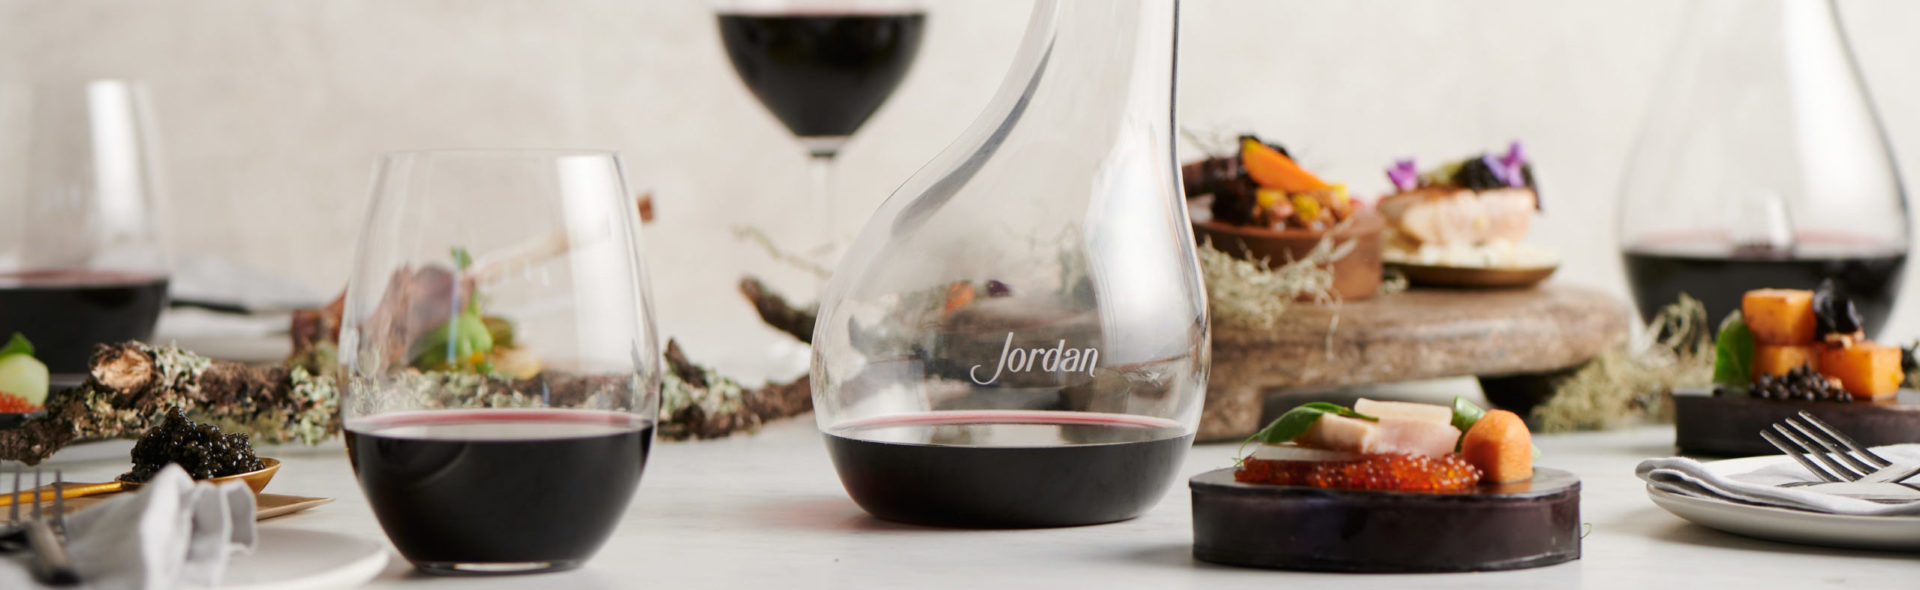 Decanter and glasses of Jordan Cabernet Sauvignon with food and branches